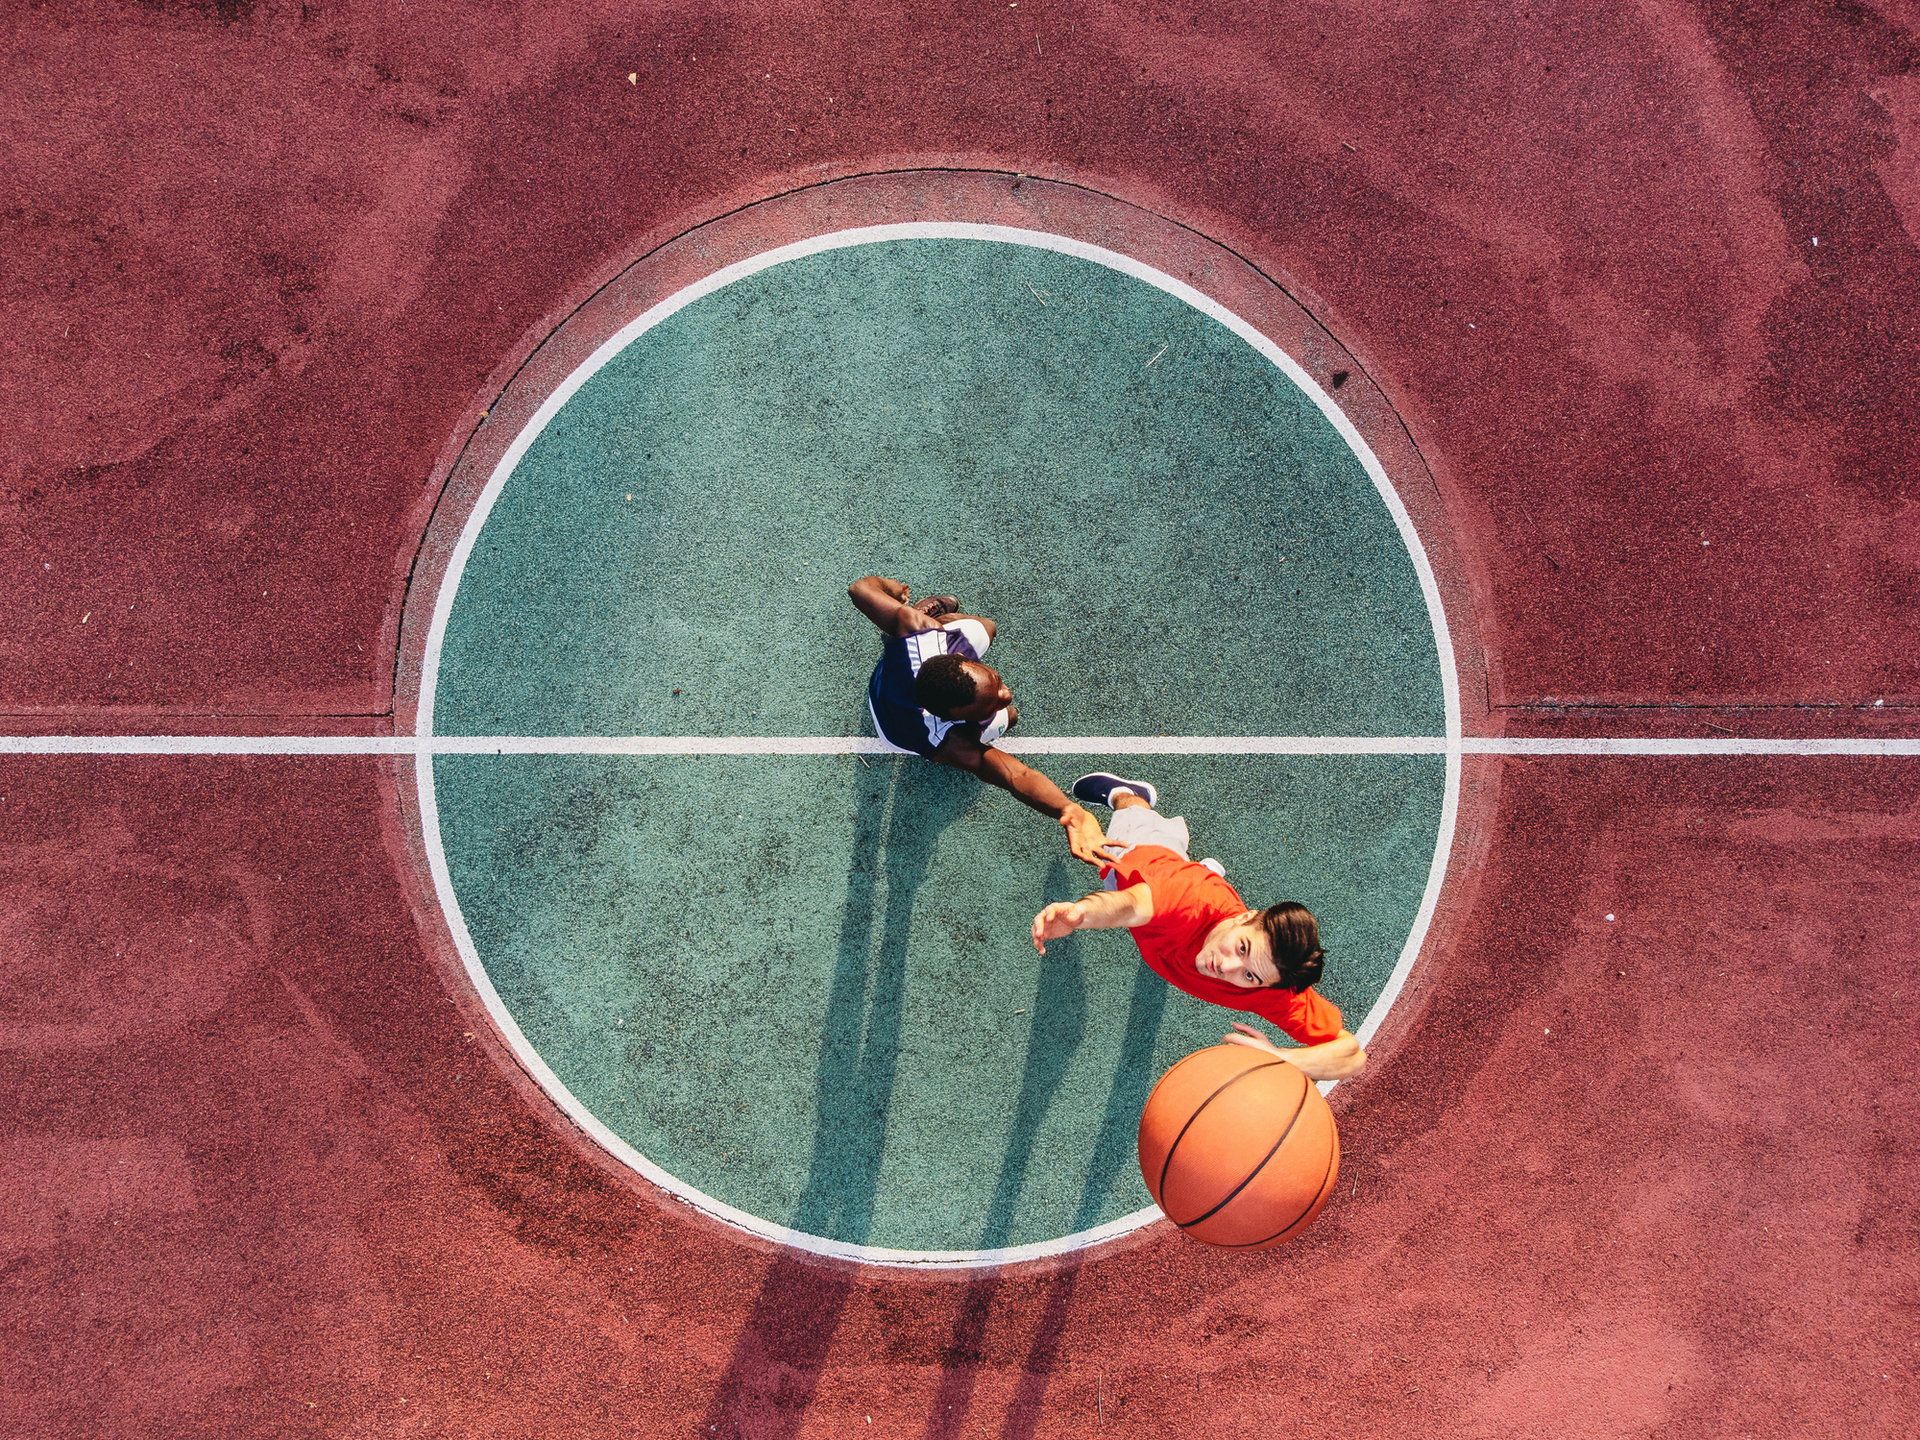 A basketball court with two people playing